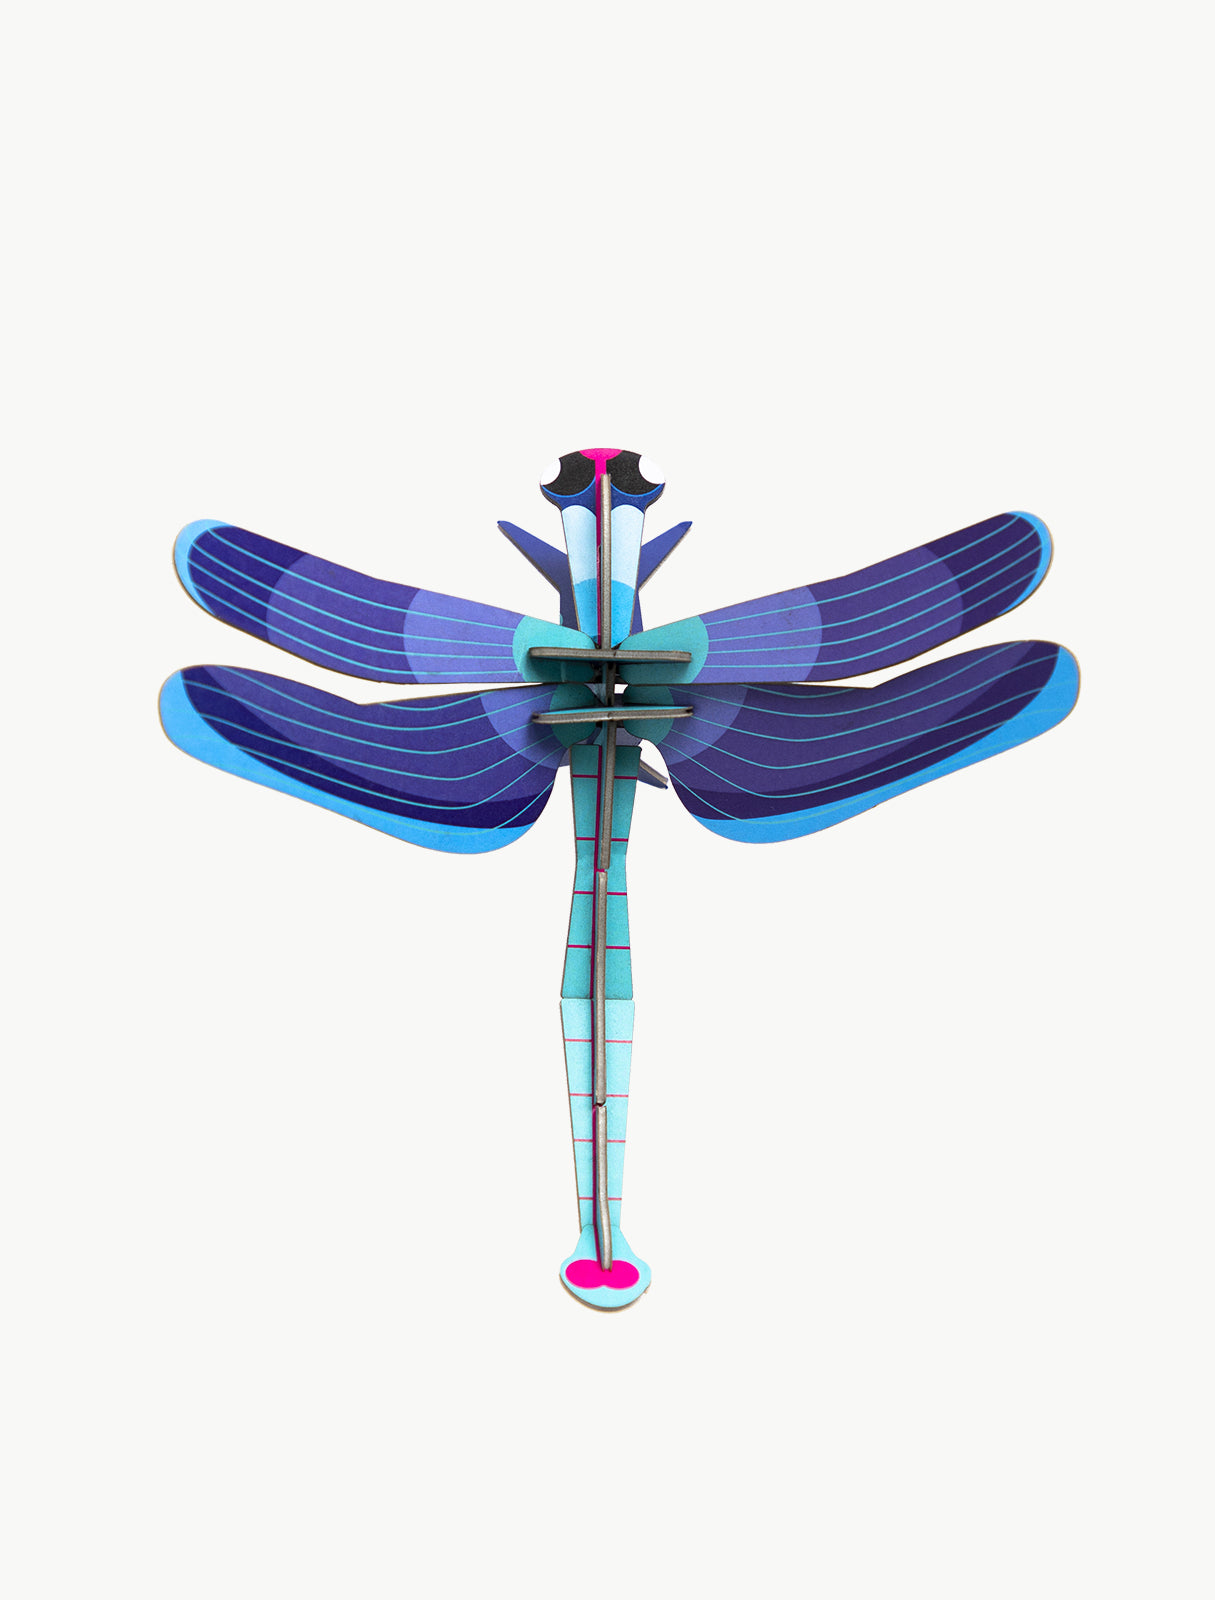 Studio ROOF Insects - Sapphire Dragonfly